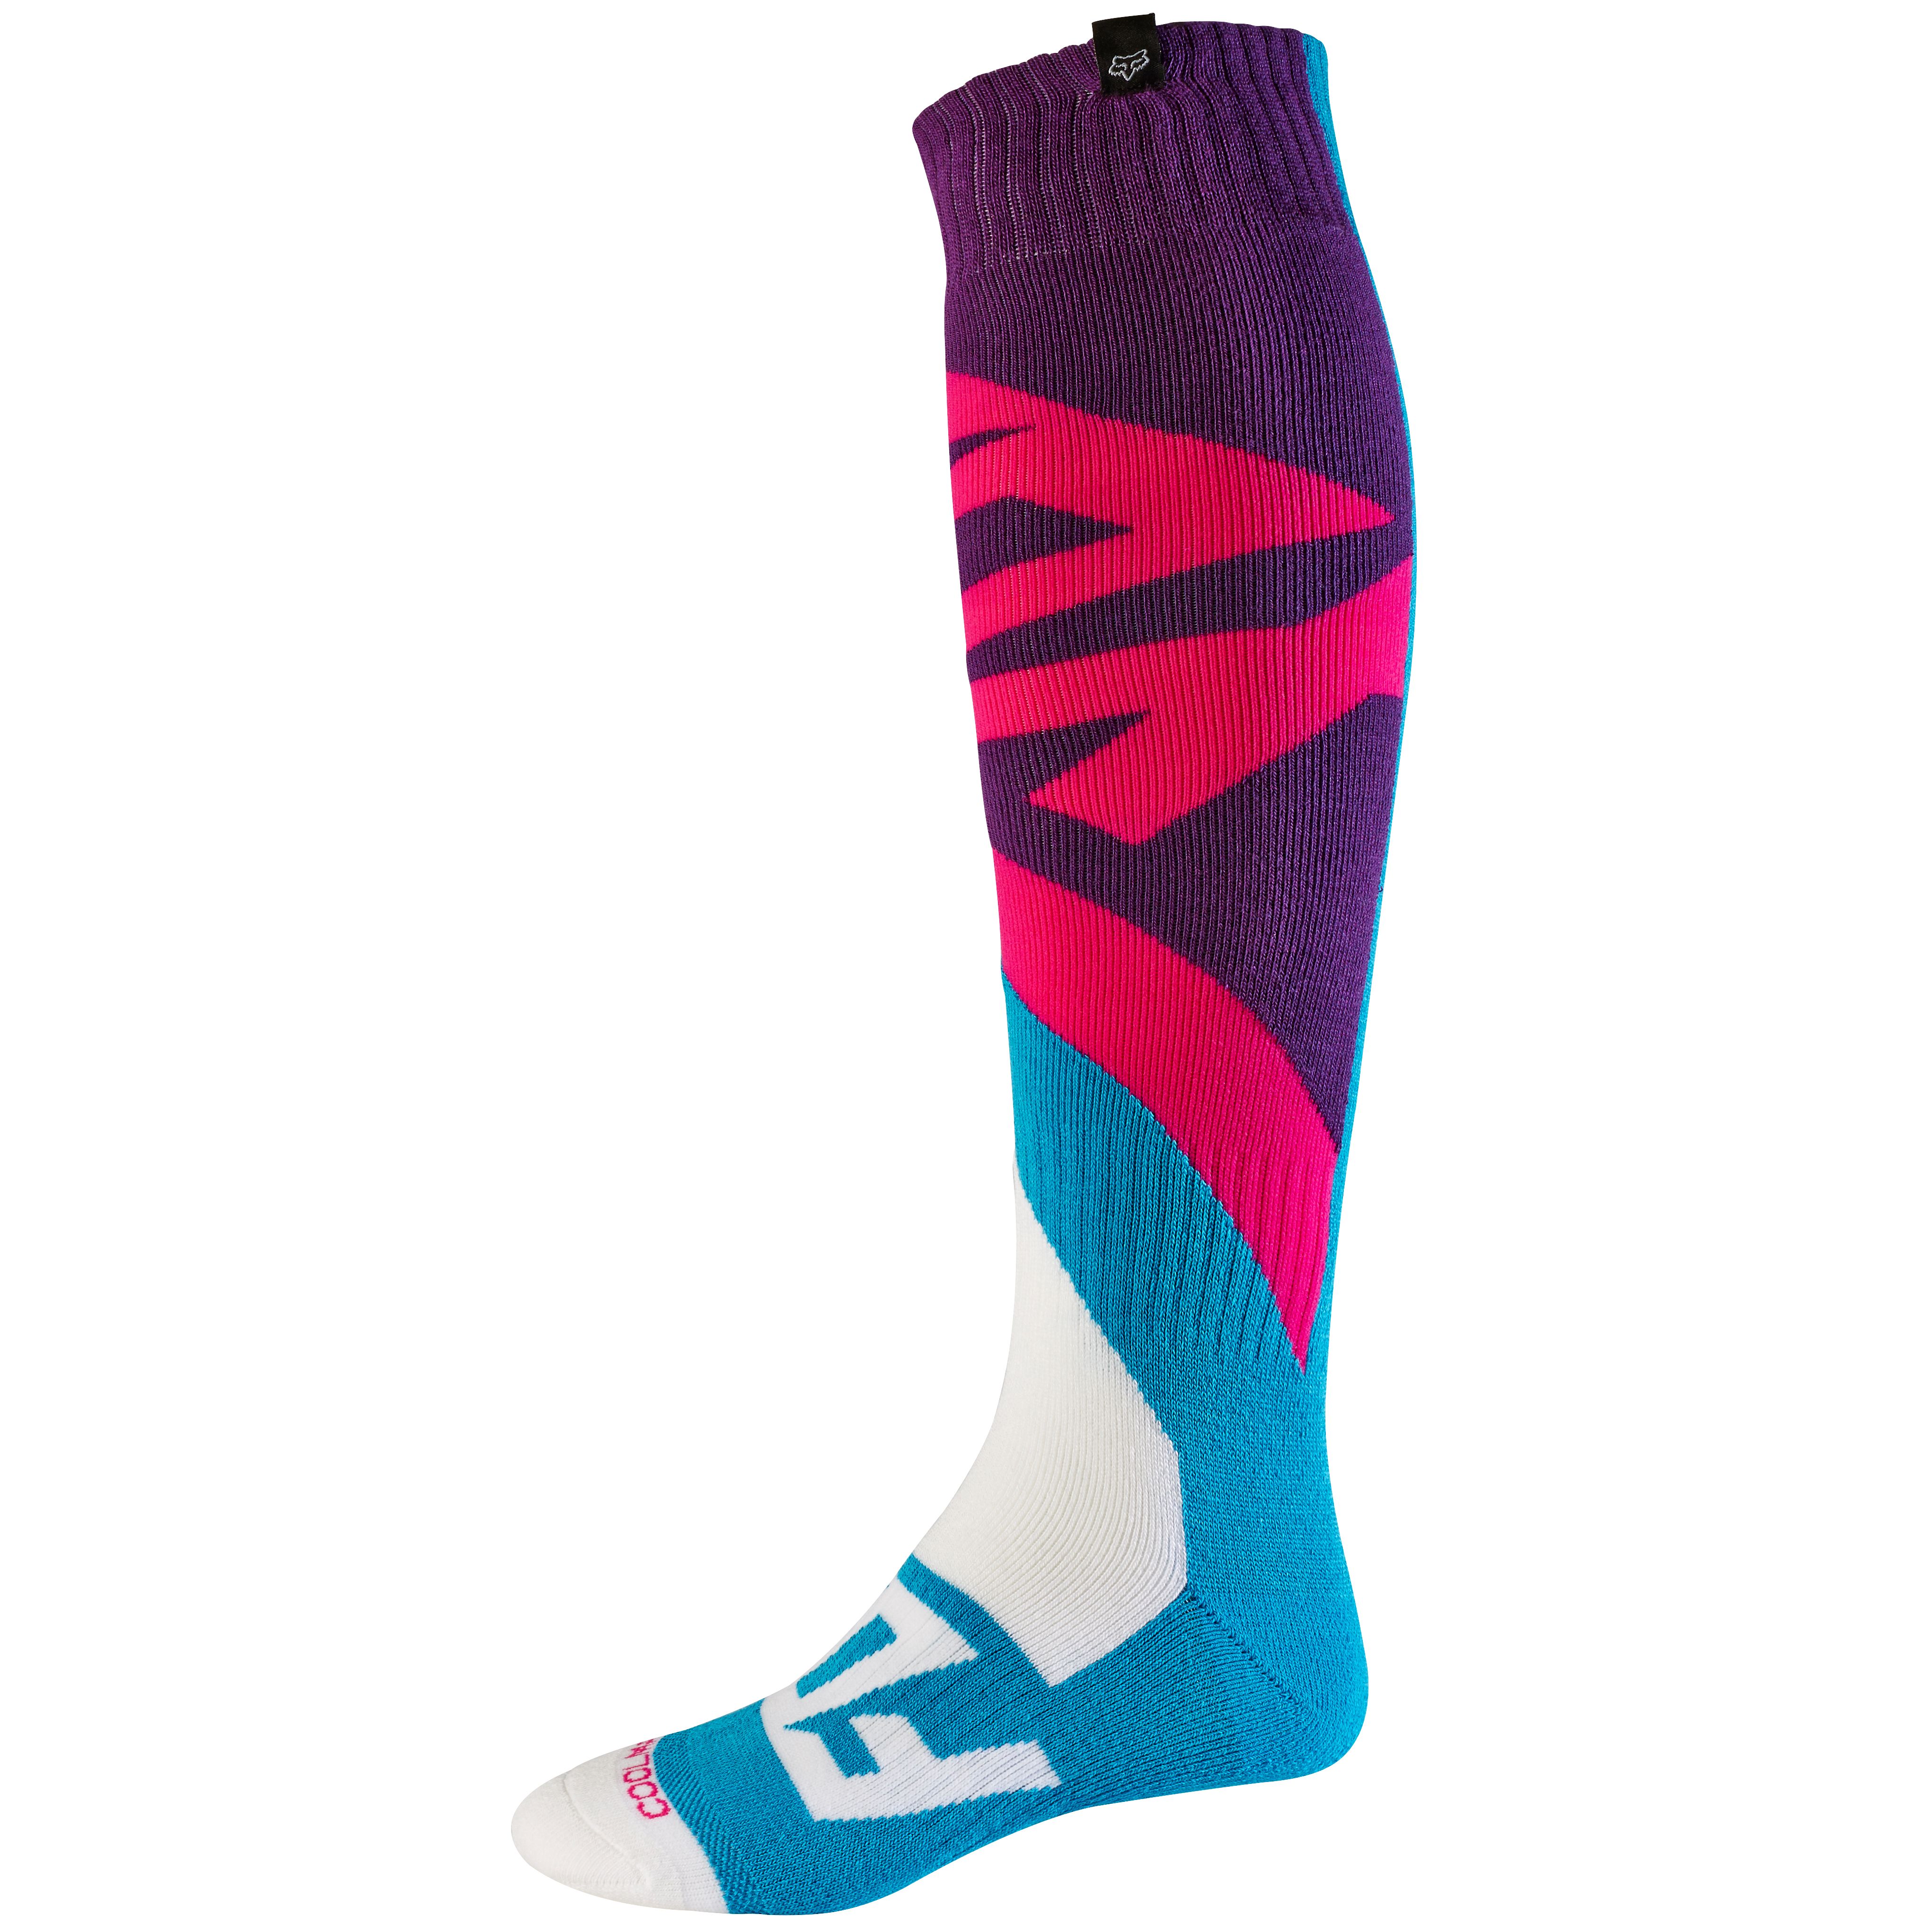 Chaussettes Fox Creo Coolmax Thick 2017 - Teal